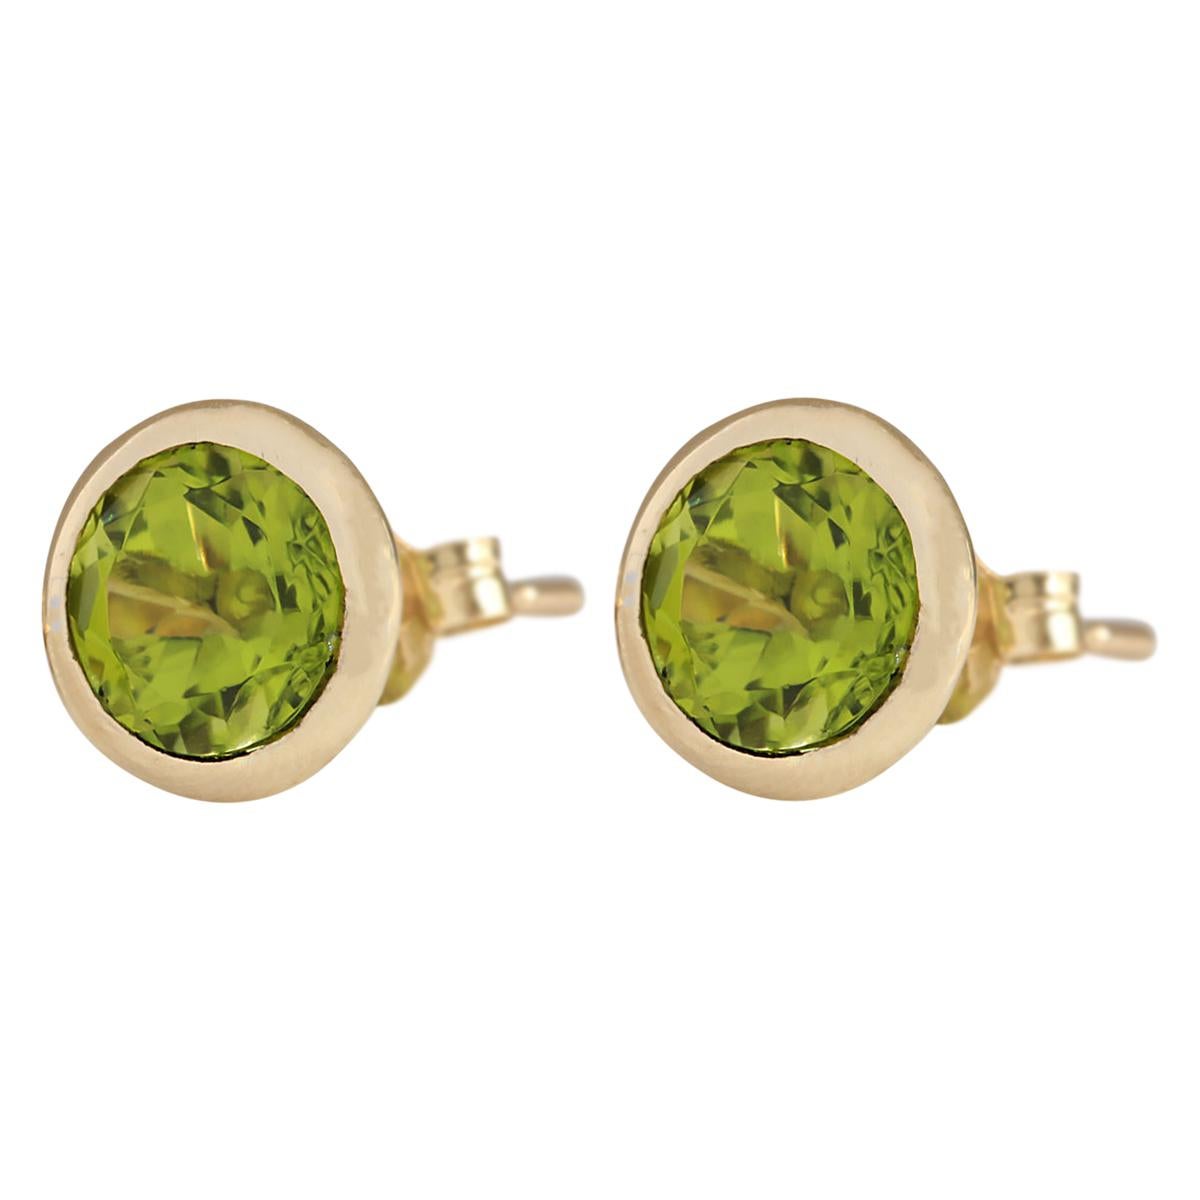 Stamped: 14K Yellow Gold
Total Earrings Weight: 1.8 Grams
Total Natural Peridot Weight is 3.00 Carat (Measures: 7.00x7.00 mm)
Color: Green
Face Measures: 8.90x8.90 mm
Sku: [703326W]